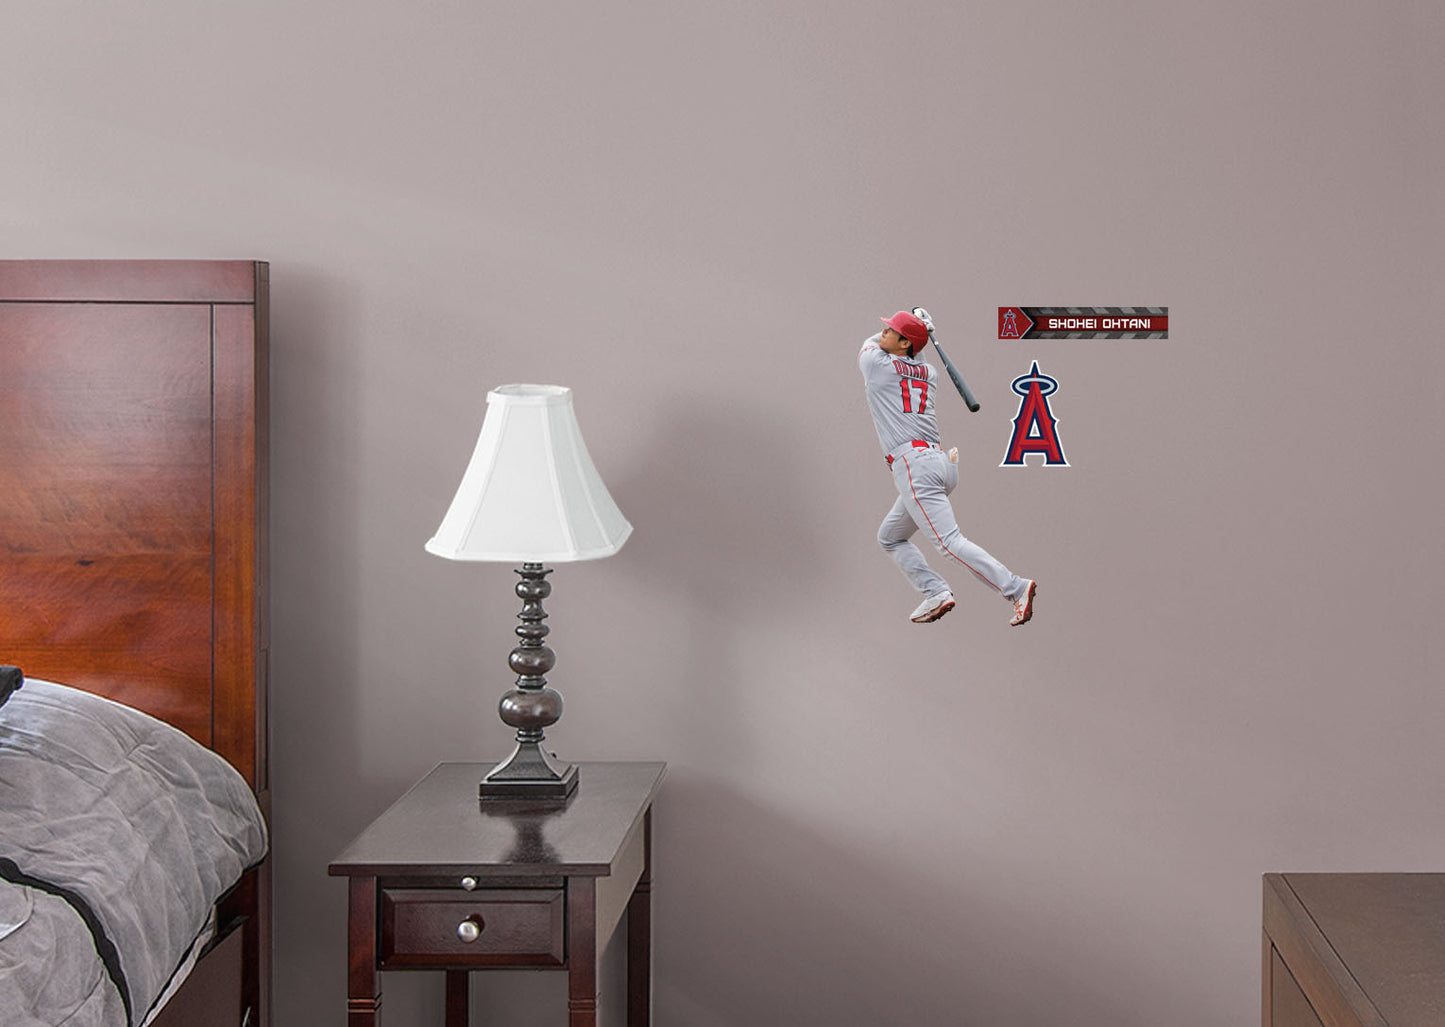 Los Angeles Angels: Shohei Ohtani         - Officially Licensed MLB Removable Wall   Adhesive Decal